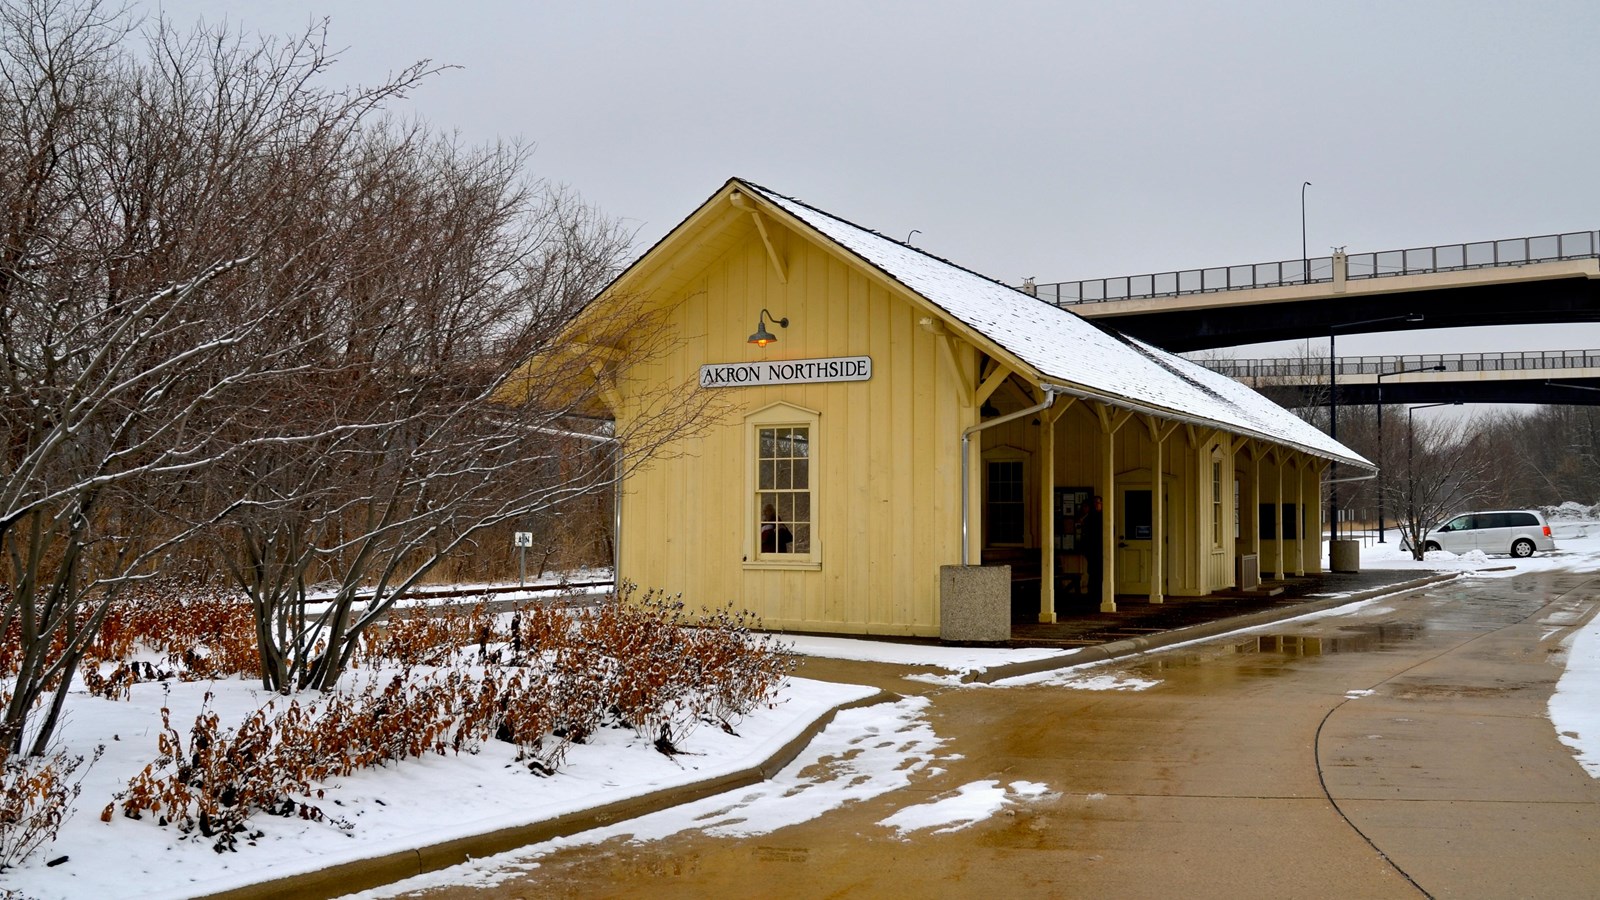 Yellow station with two sheltered waiting areas separated by a ticket booth. Snow on the ground.